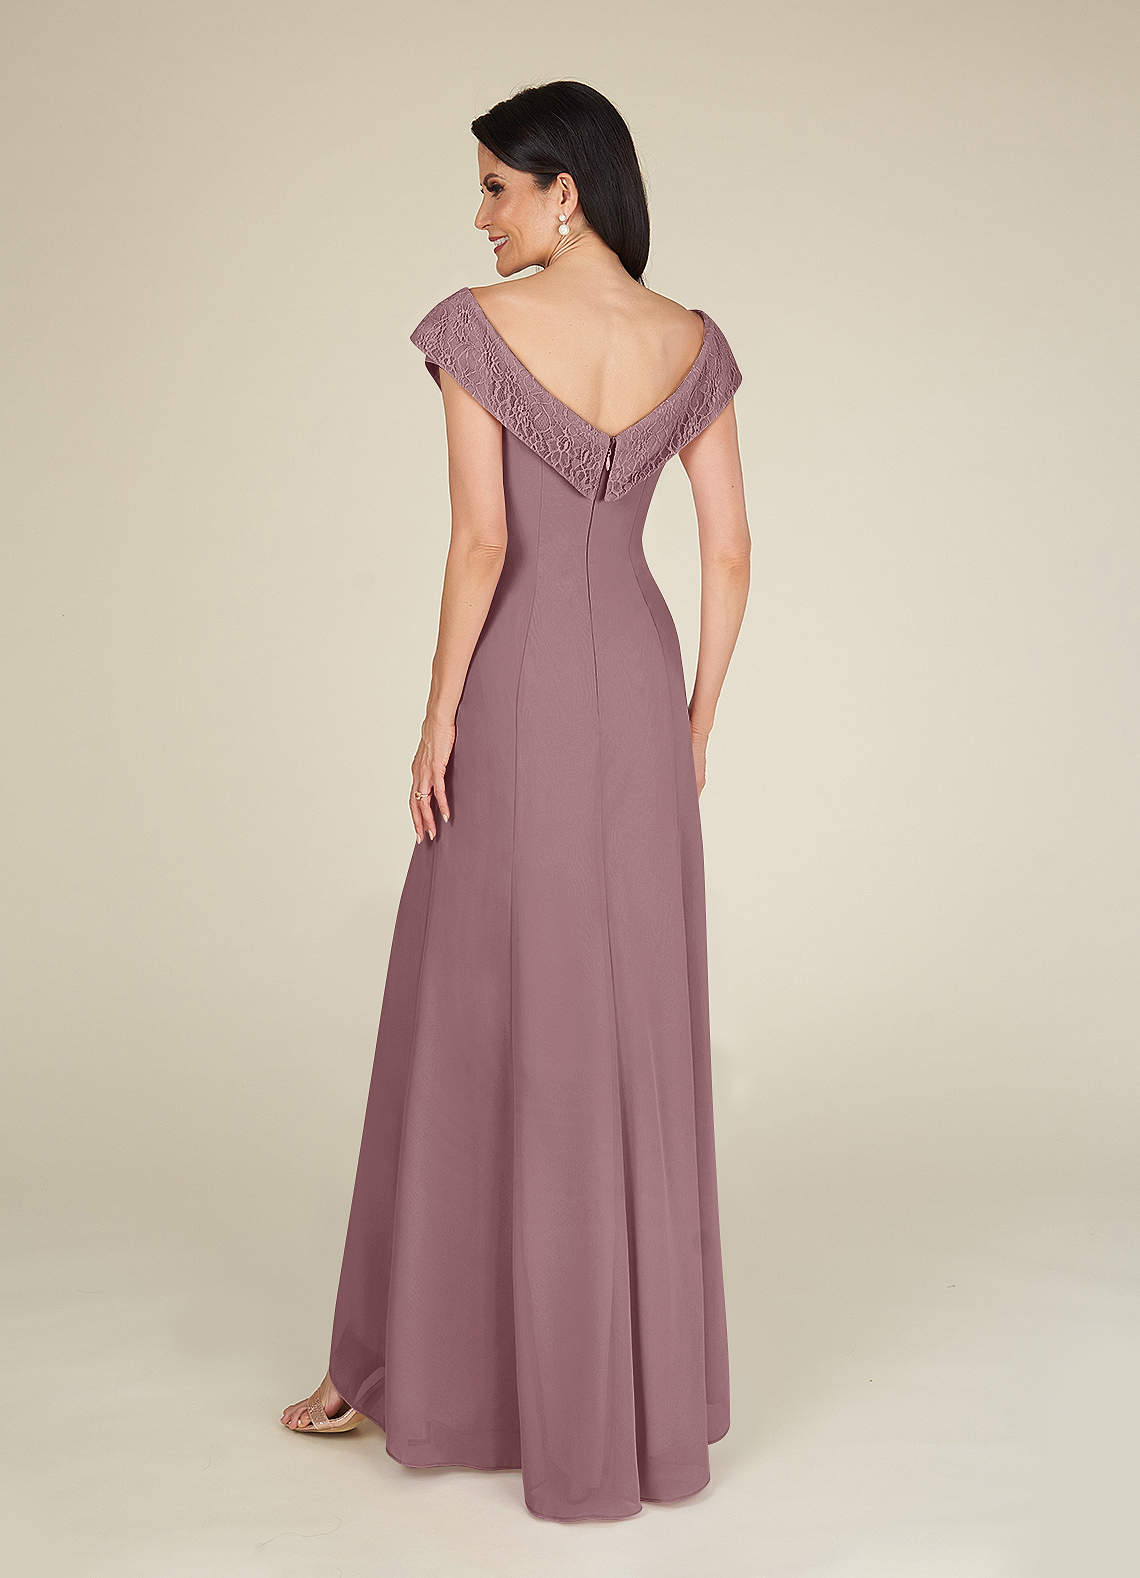 Azazie Cupid Mother of the Bride Dresses A-Line Boatneck Lace Chiffon Floor-Length Dress image1